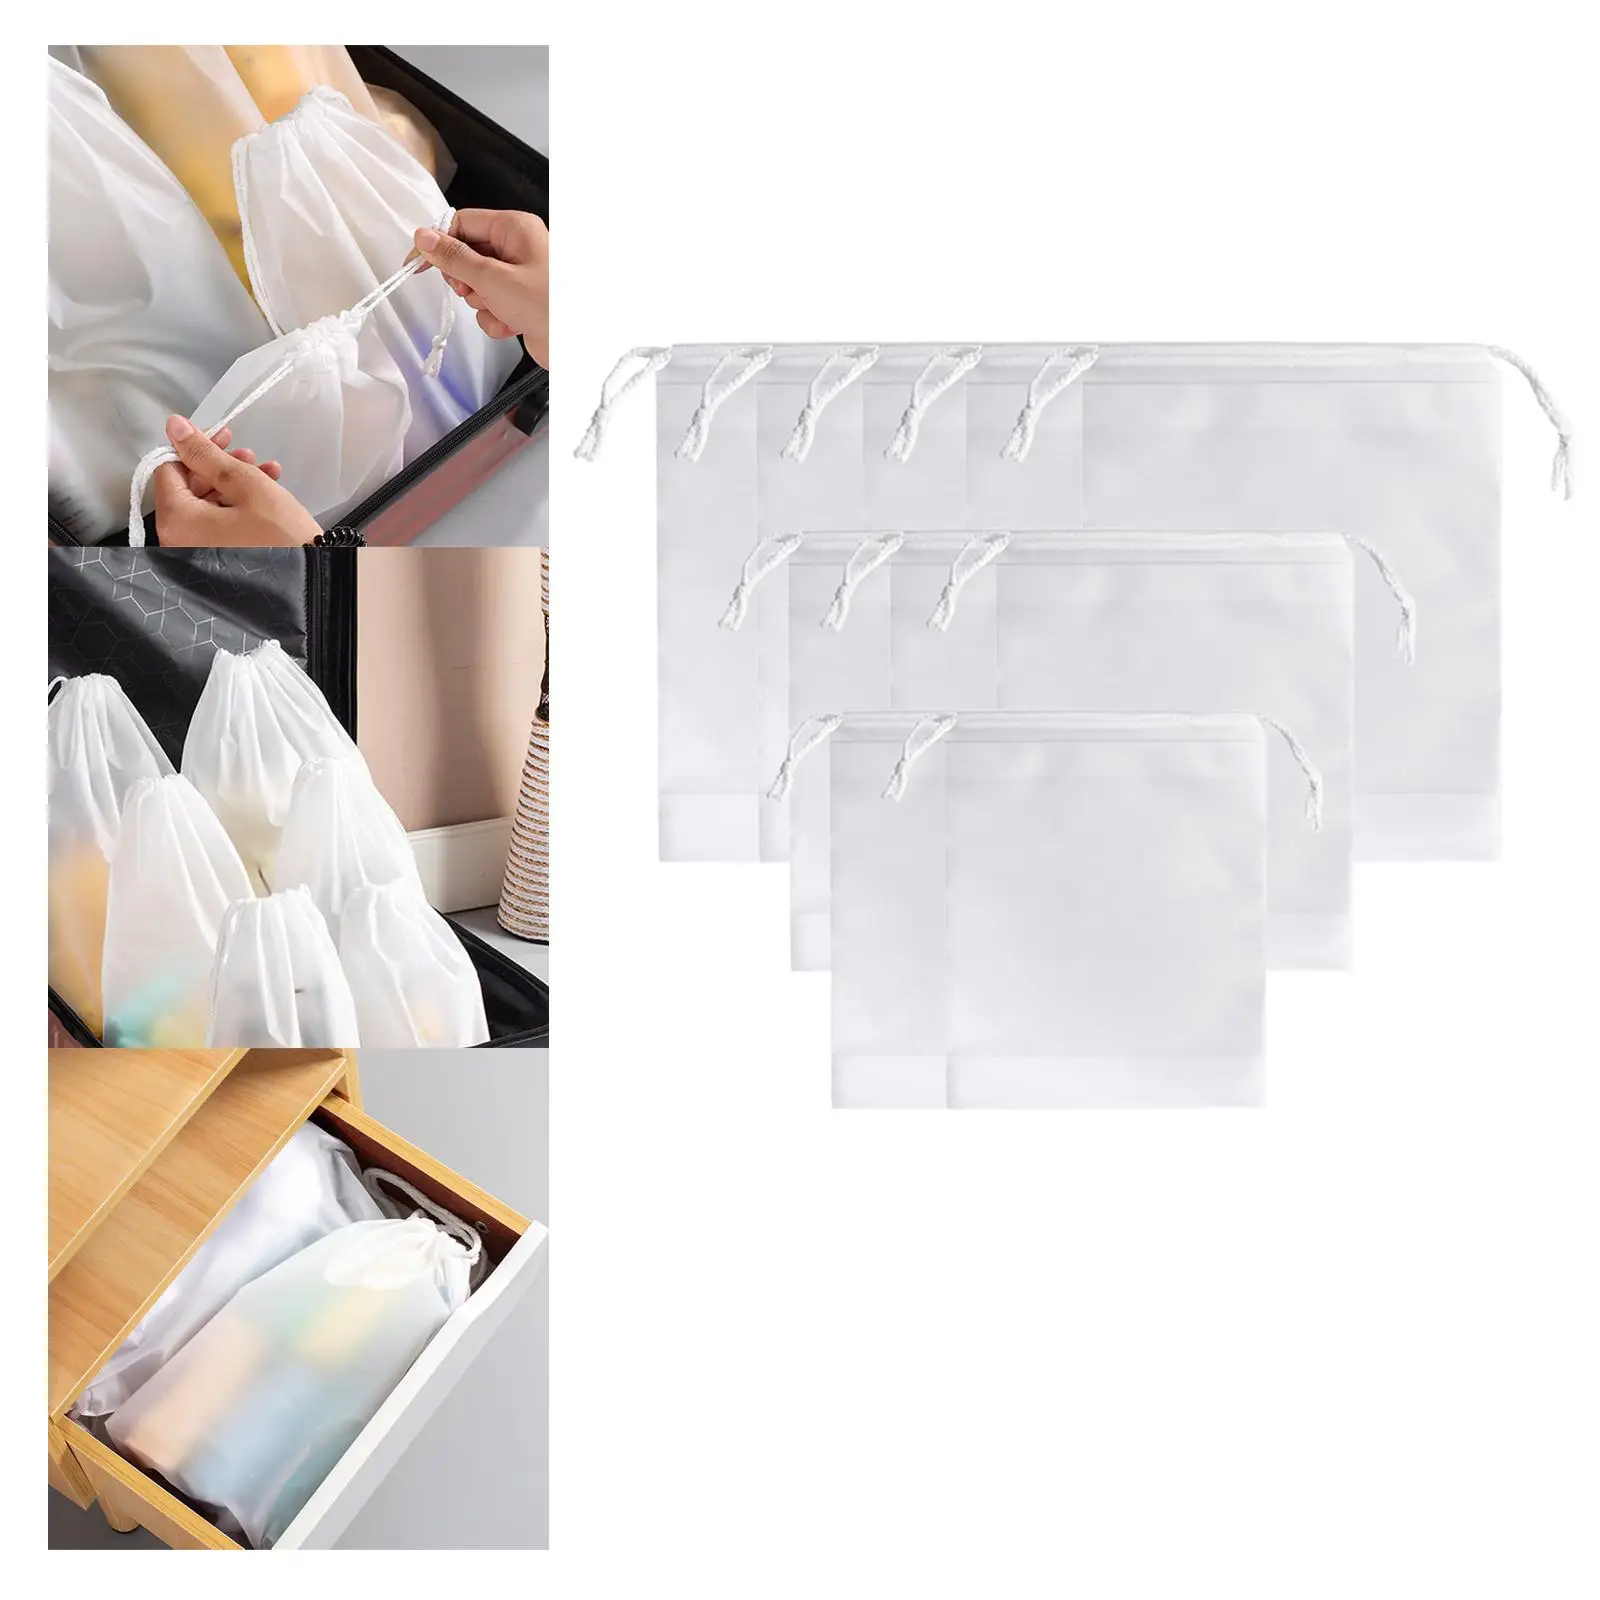 10Pcs Portable Travel Drawstring Storage Bags Reusable Foldable Shoe Dust Bags Shoe Organizer Packing Organisers for Backpacking